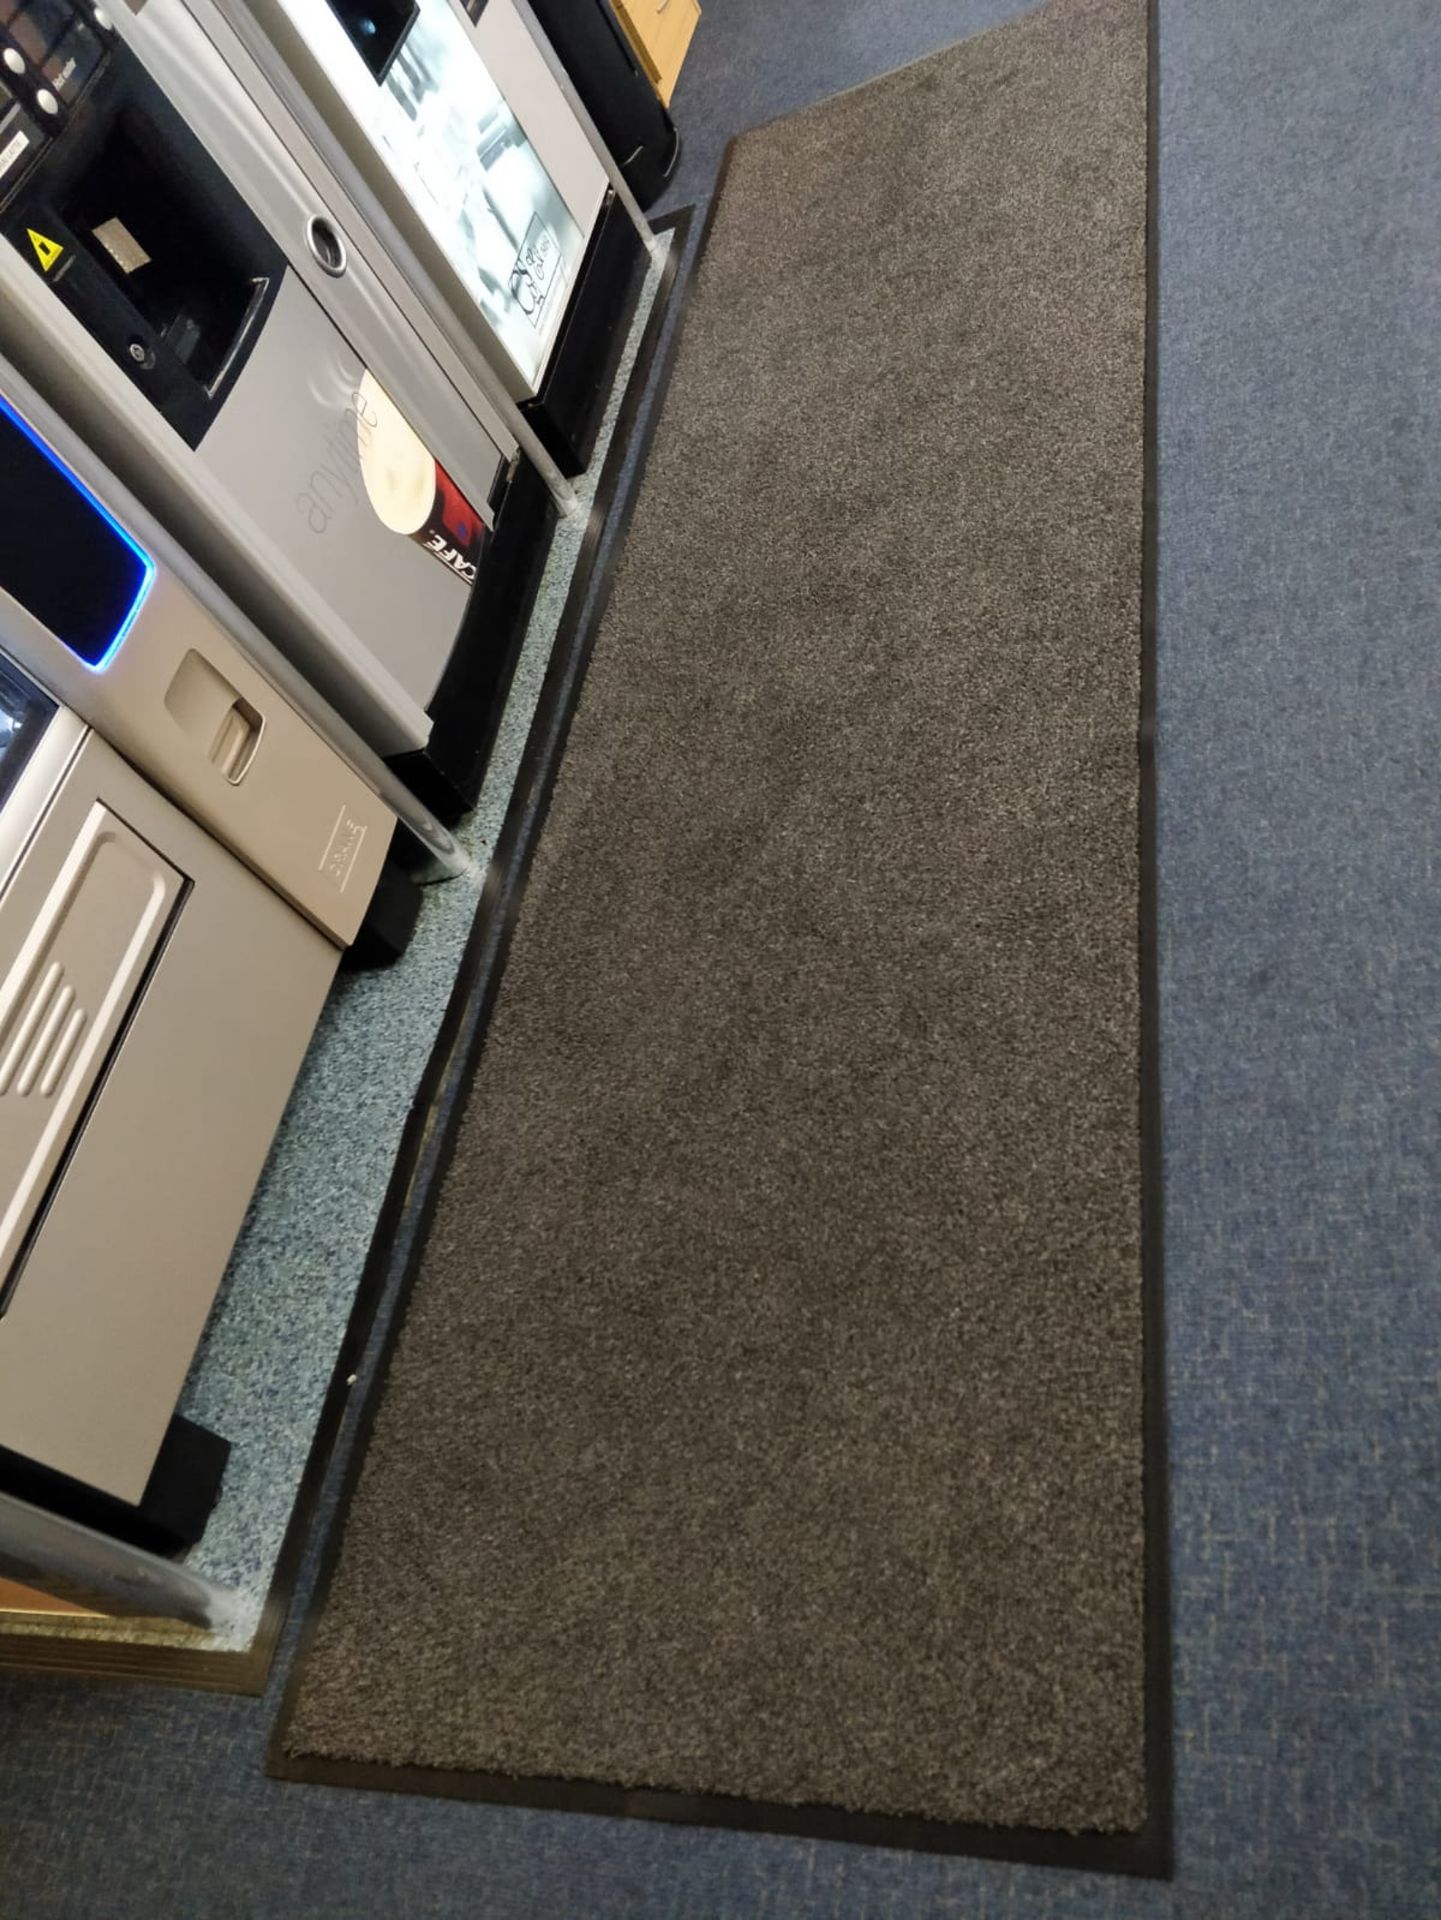 1 x Large Rubber Backed Floor Matt - Office Use Only - Approx Length 300cms Ref B1 - CL409 -